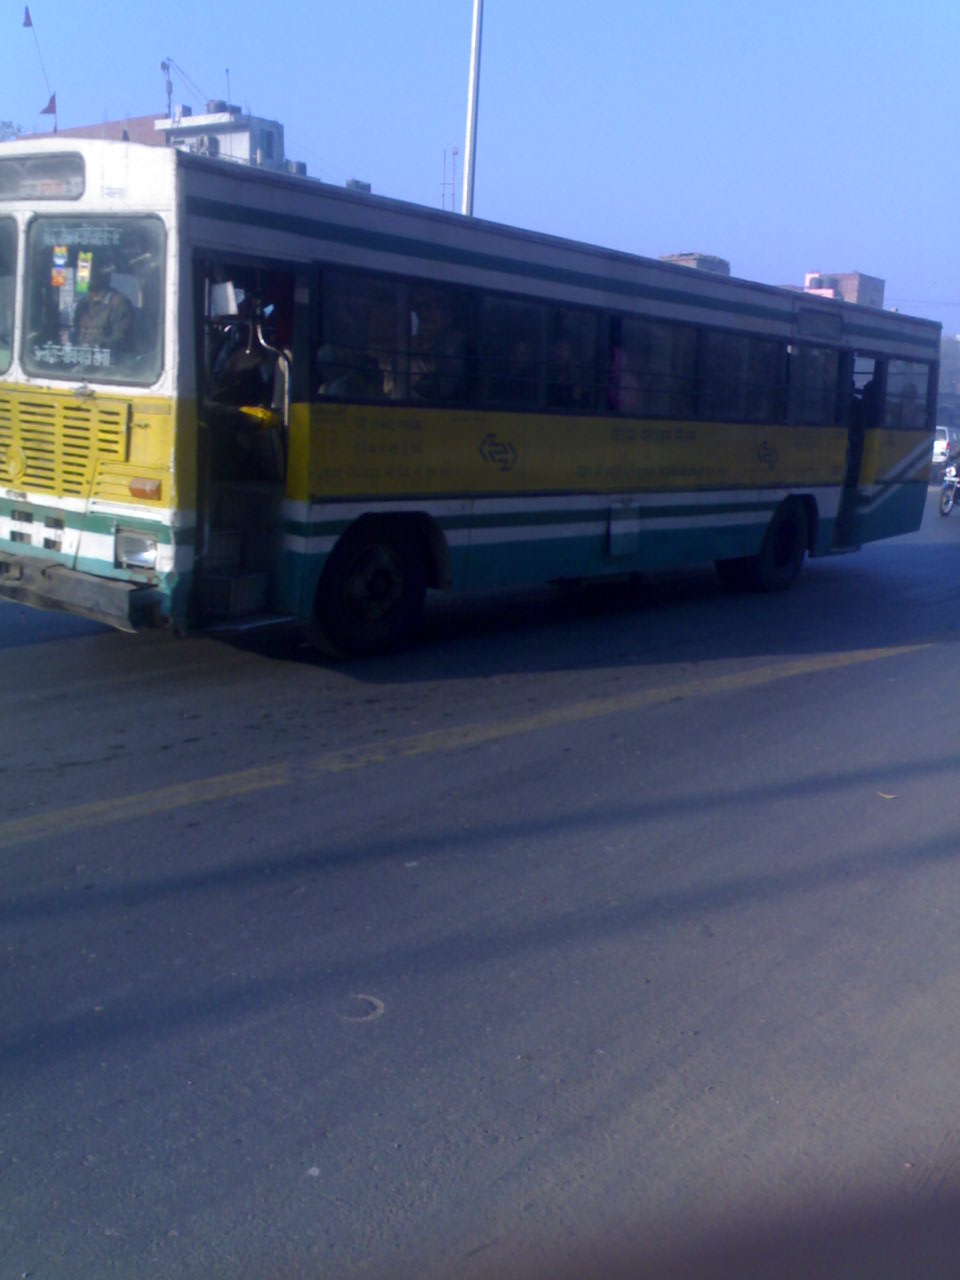 an abandoned yellow and green bus sits in the street